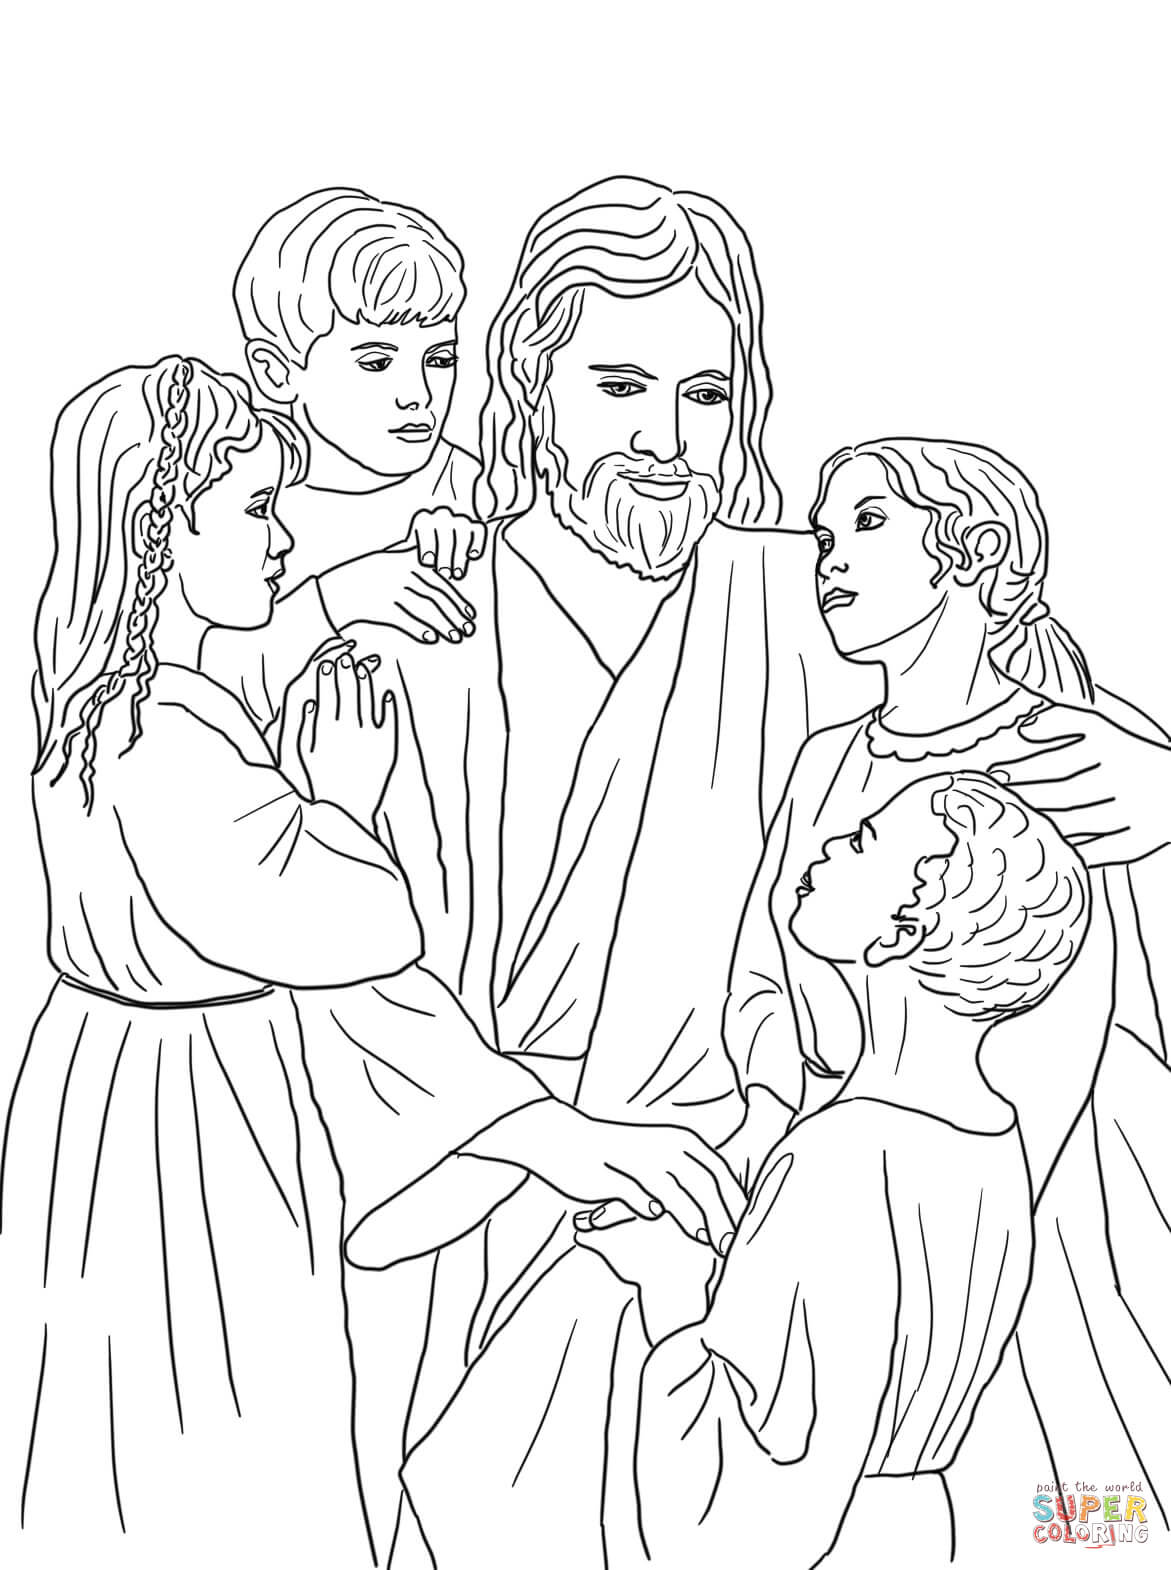 Jesus Loves All the Children of the World coloring page | Free